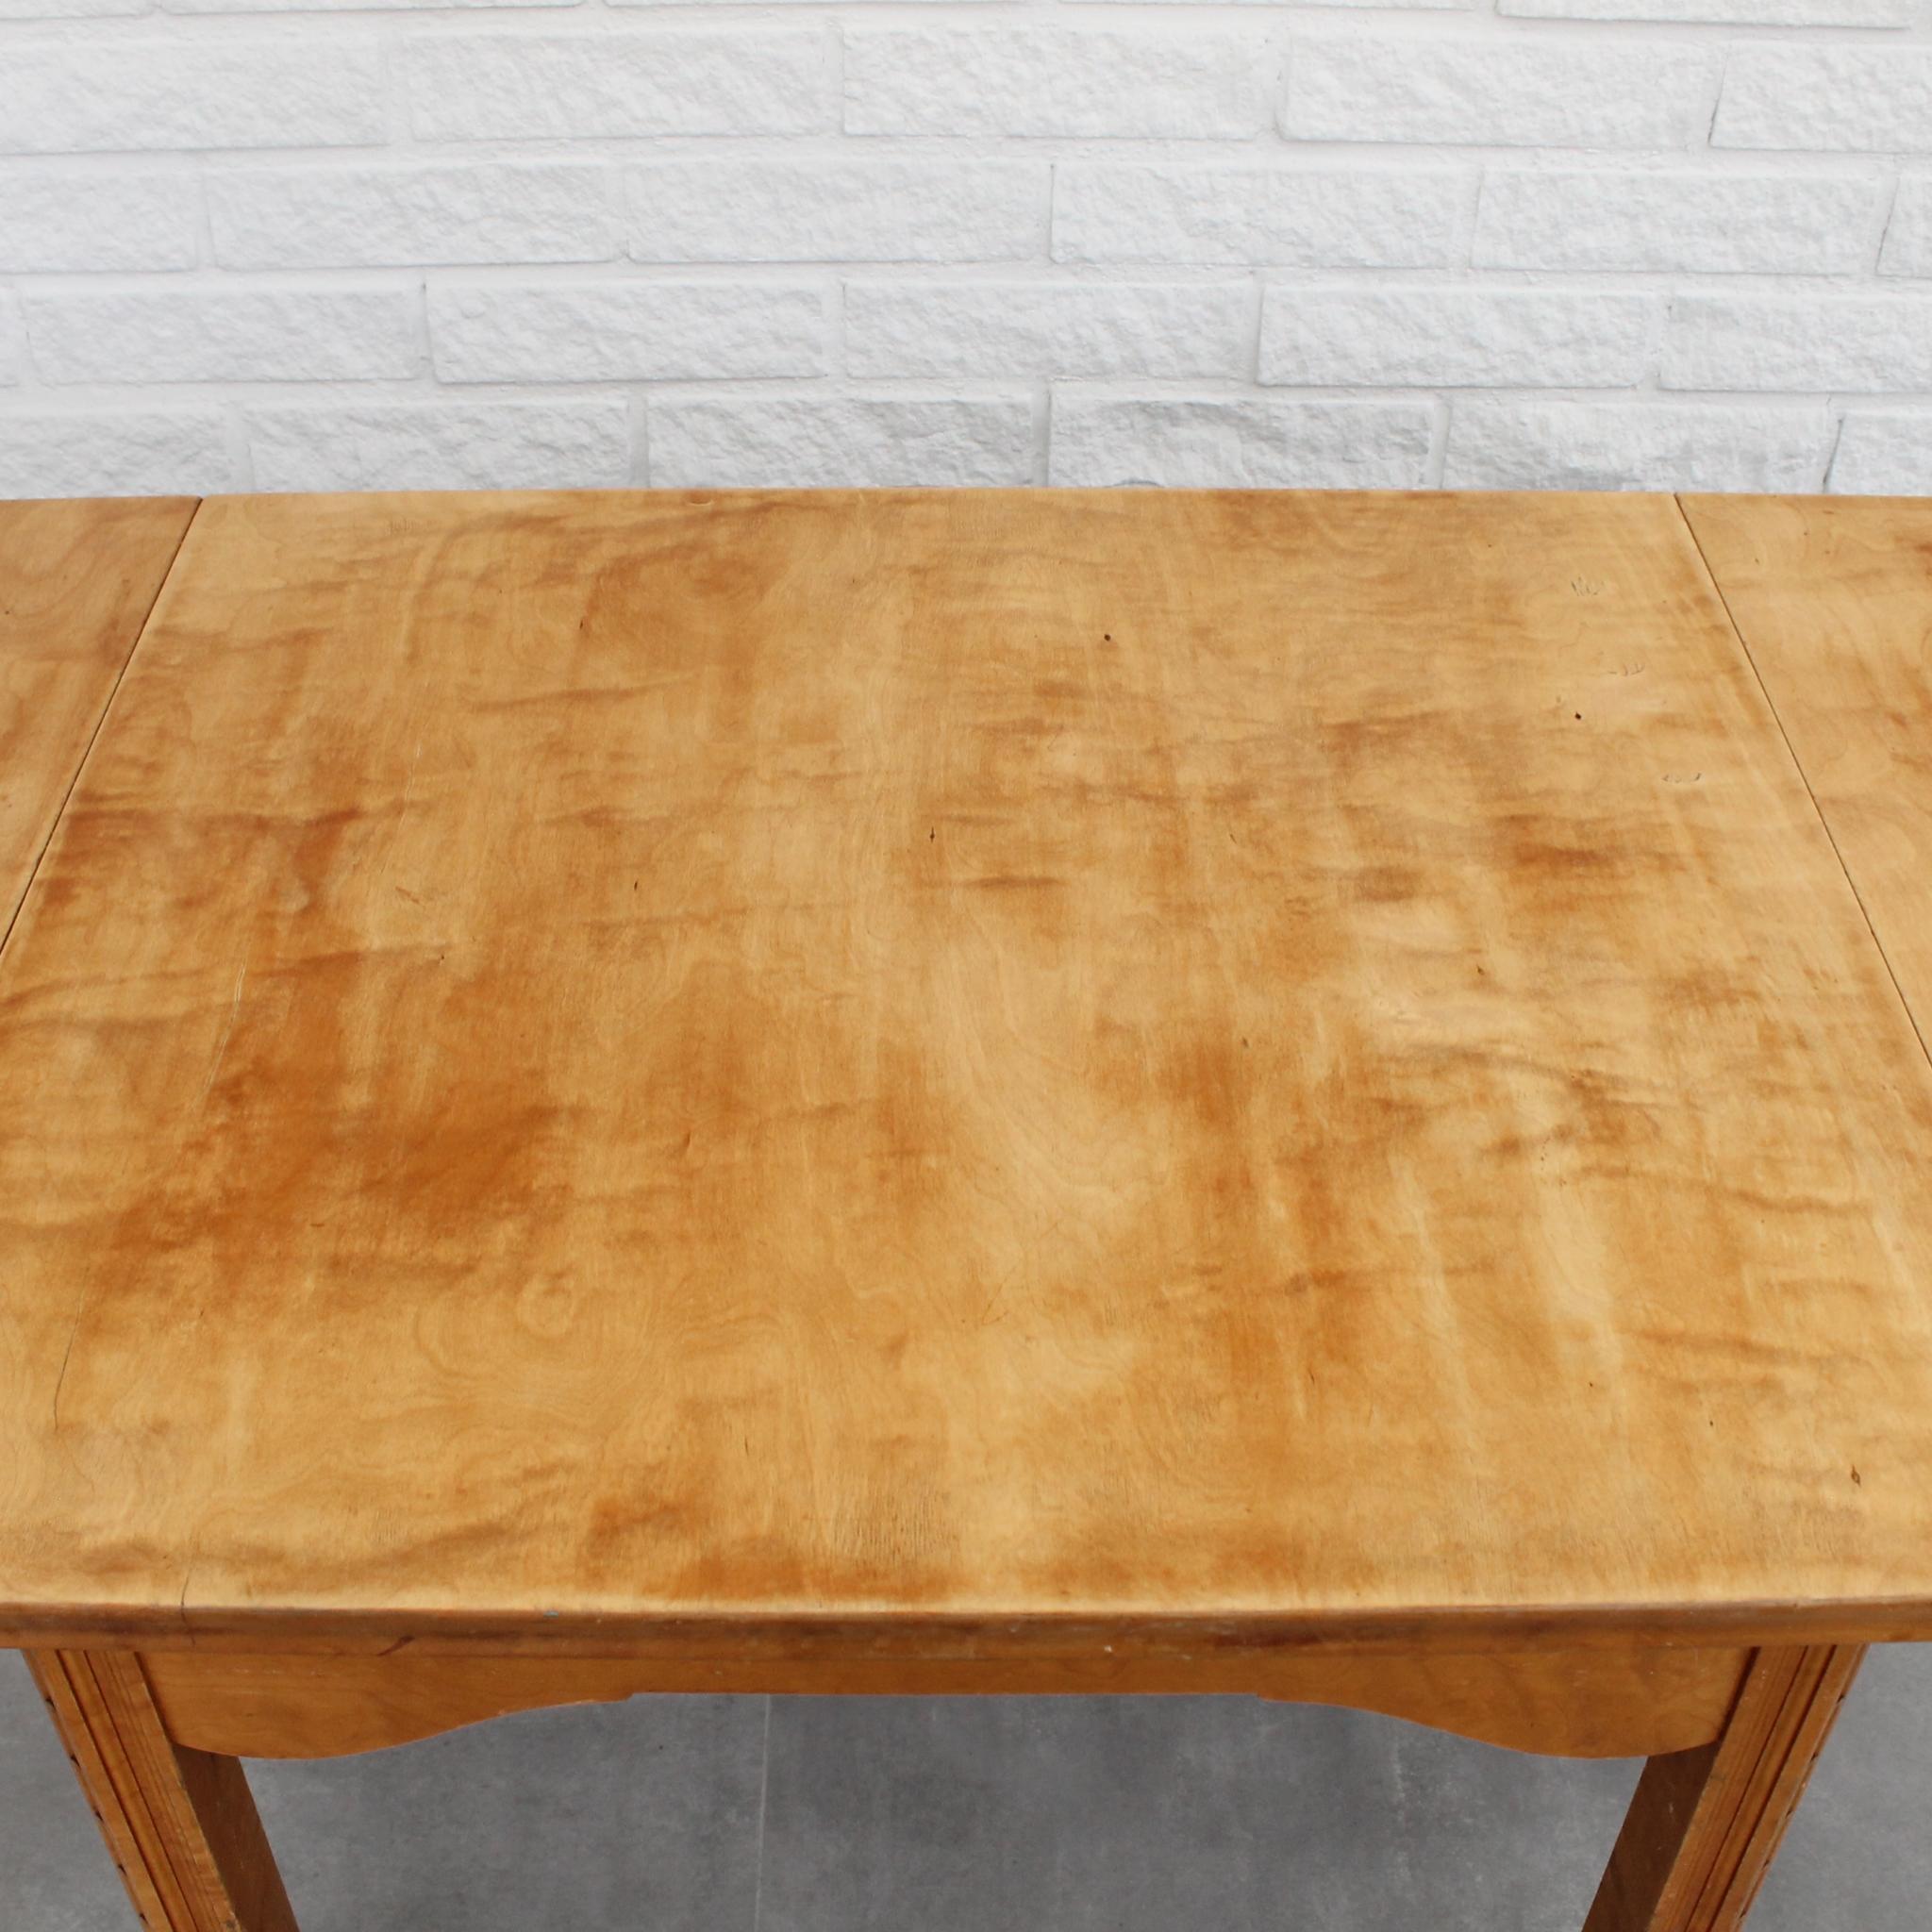 Early 20th Century Art Nouveau dining table by Nordiska Kompaniet for the Gasworks of Stockholm For Sale